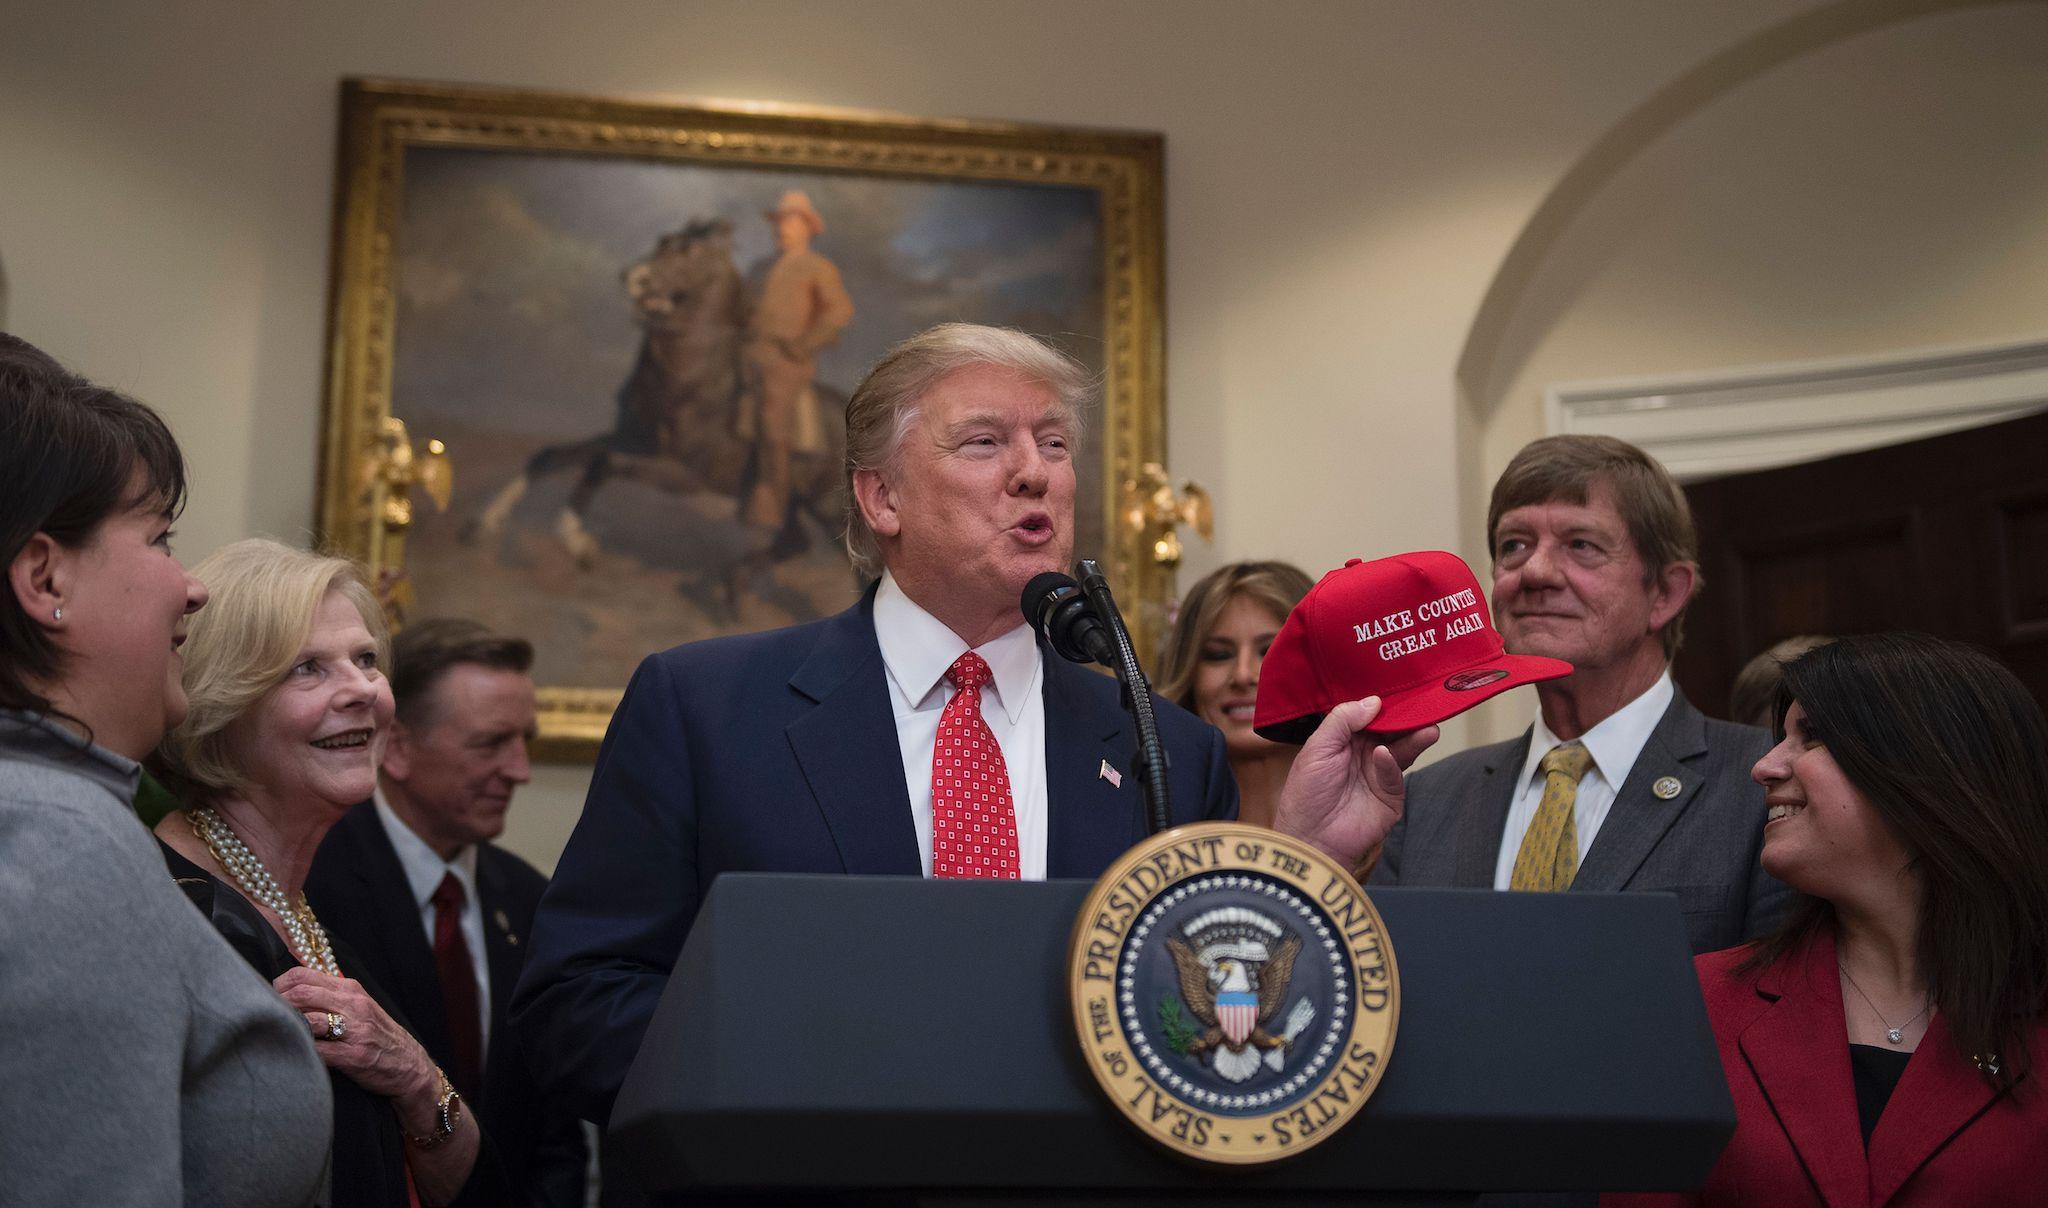 US President Donald Trump holds up a red cap that reads "Make Counties Great Again"